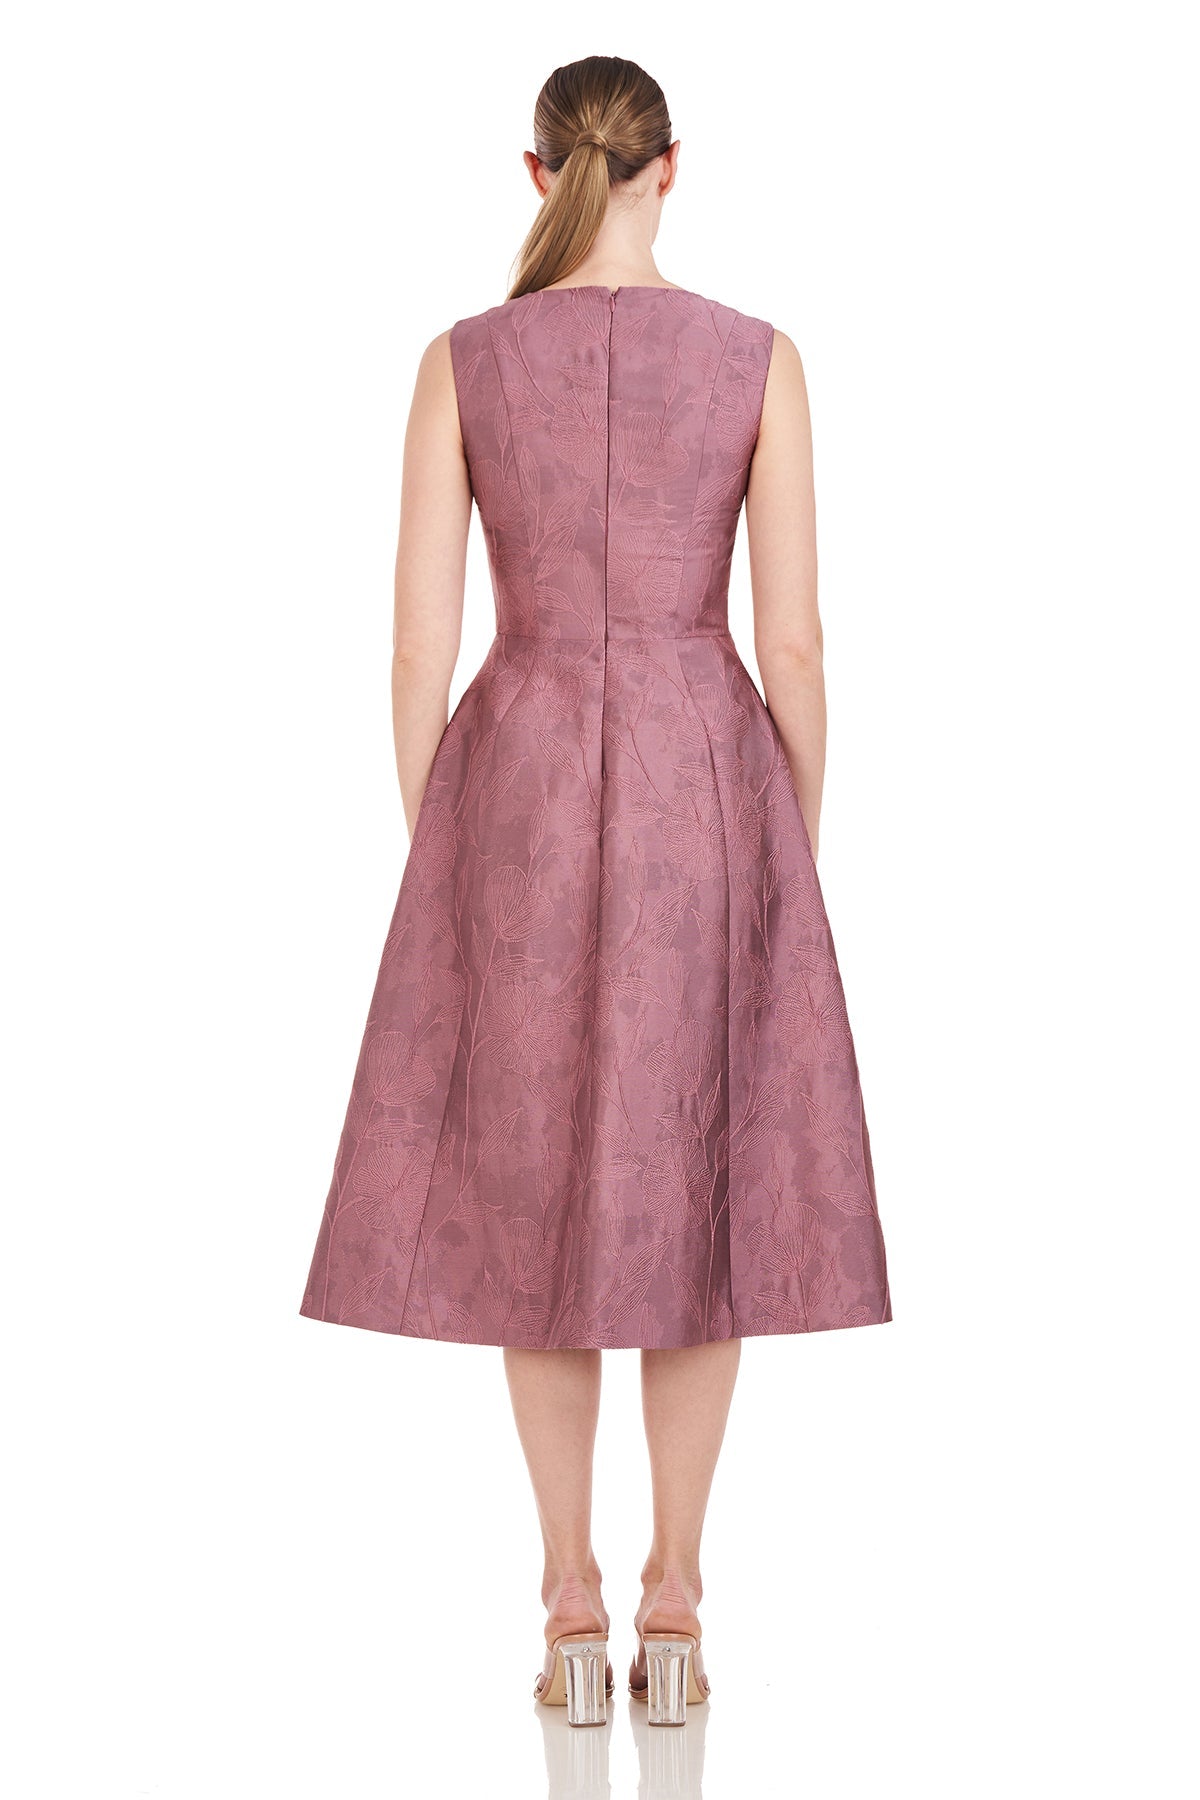 Kay Unger Norma Cocktail Dress